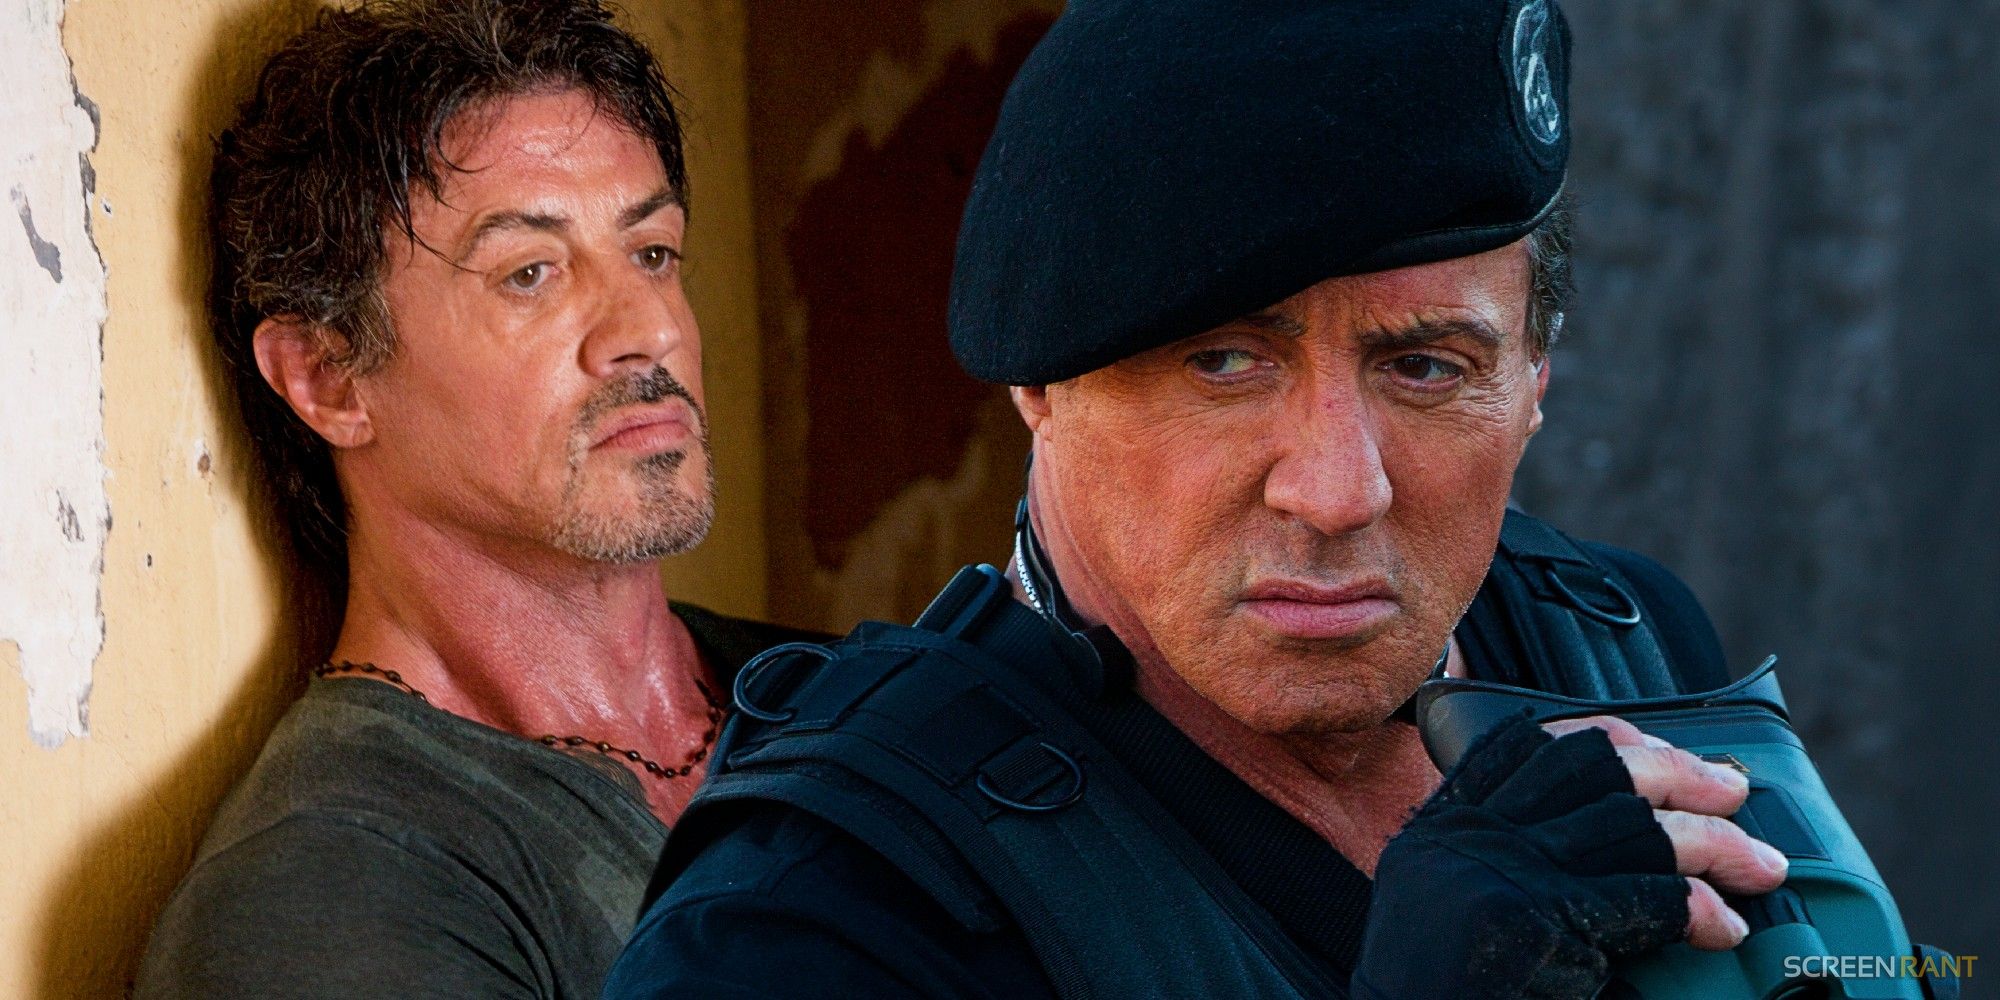 1 Of The Expendables’ Best Lines Was Improvised By The Actor (& Almost Cut From The Movie)